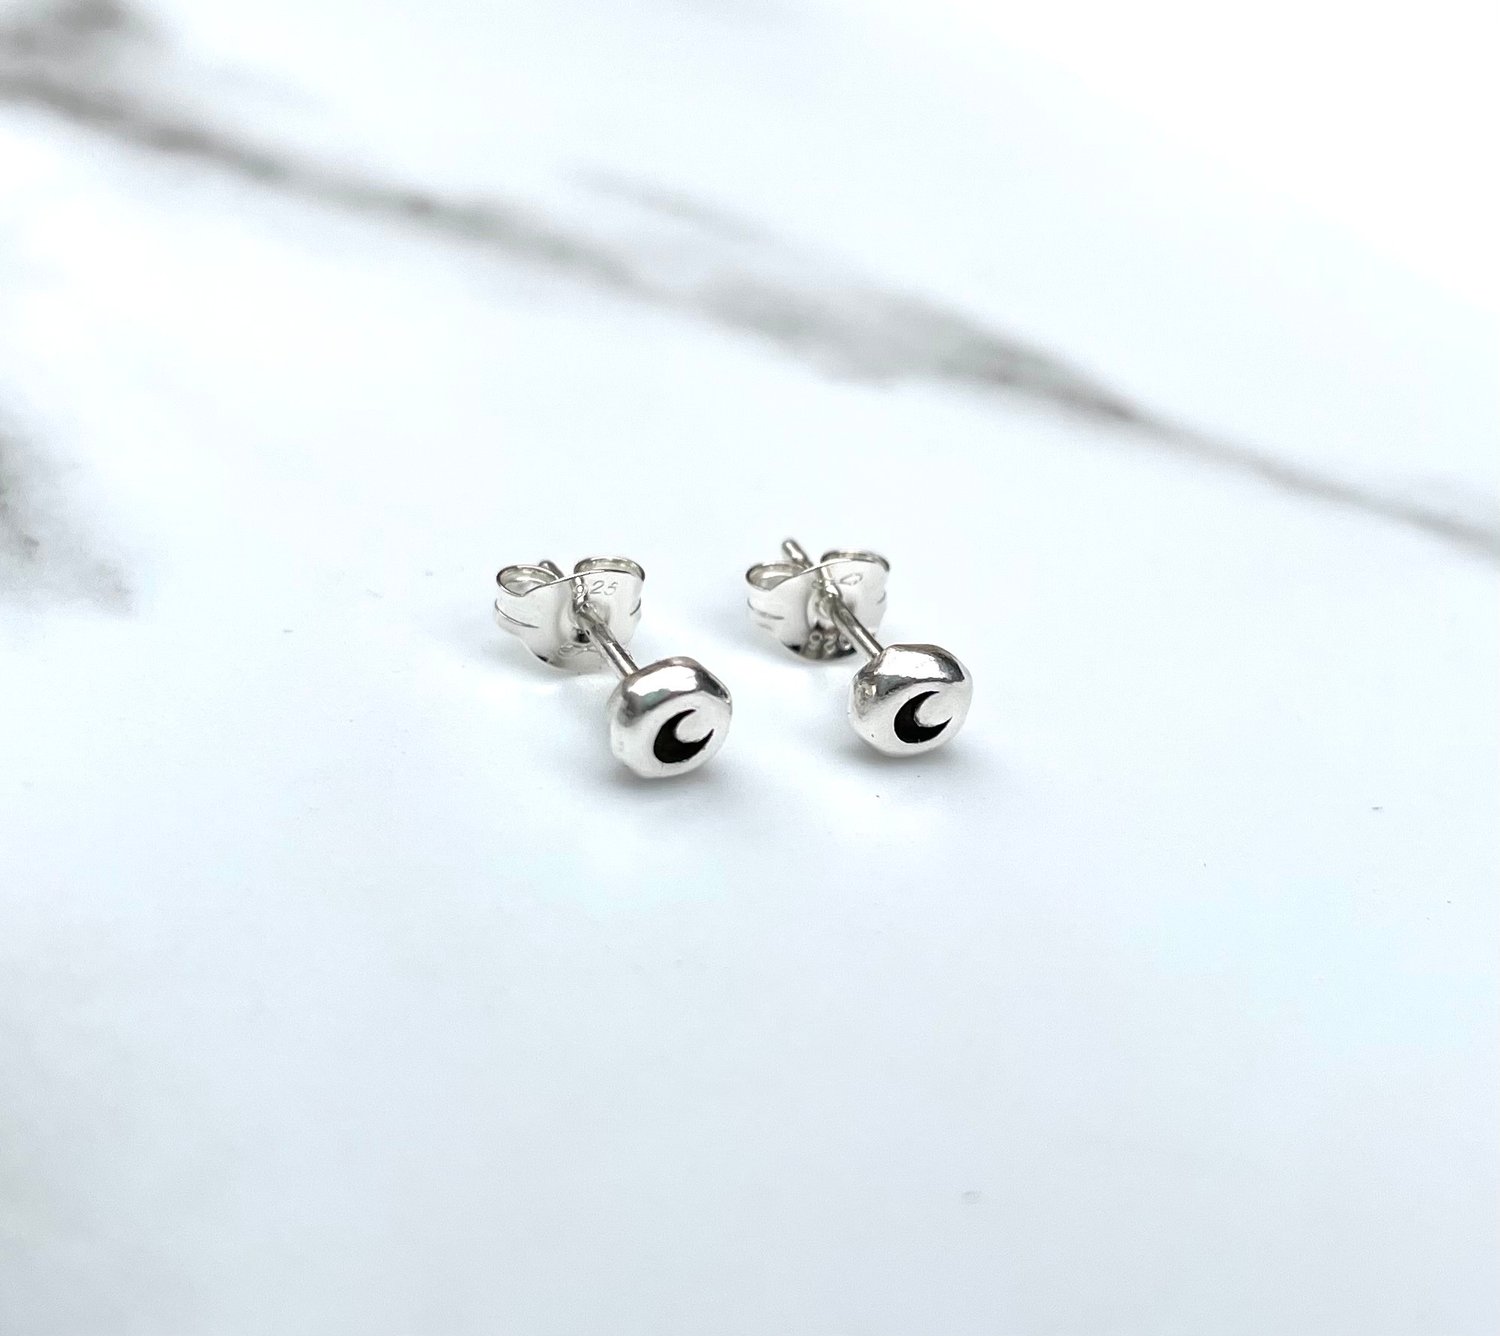 Image of Two Pairs Of Handmade Studs - Star And Crescent Moon Studs Sterling Silver 925